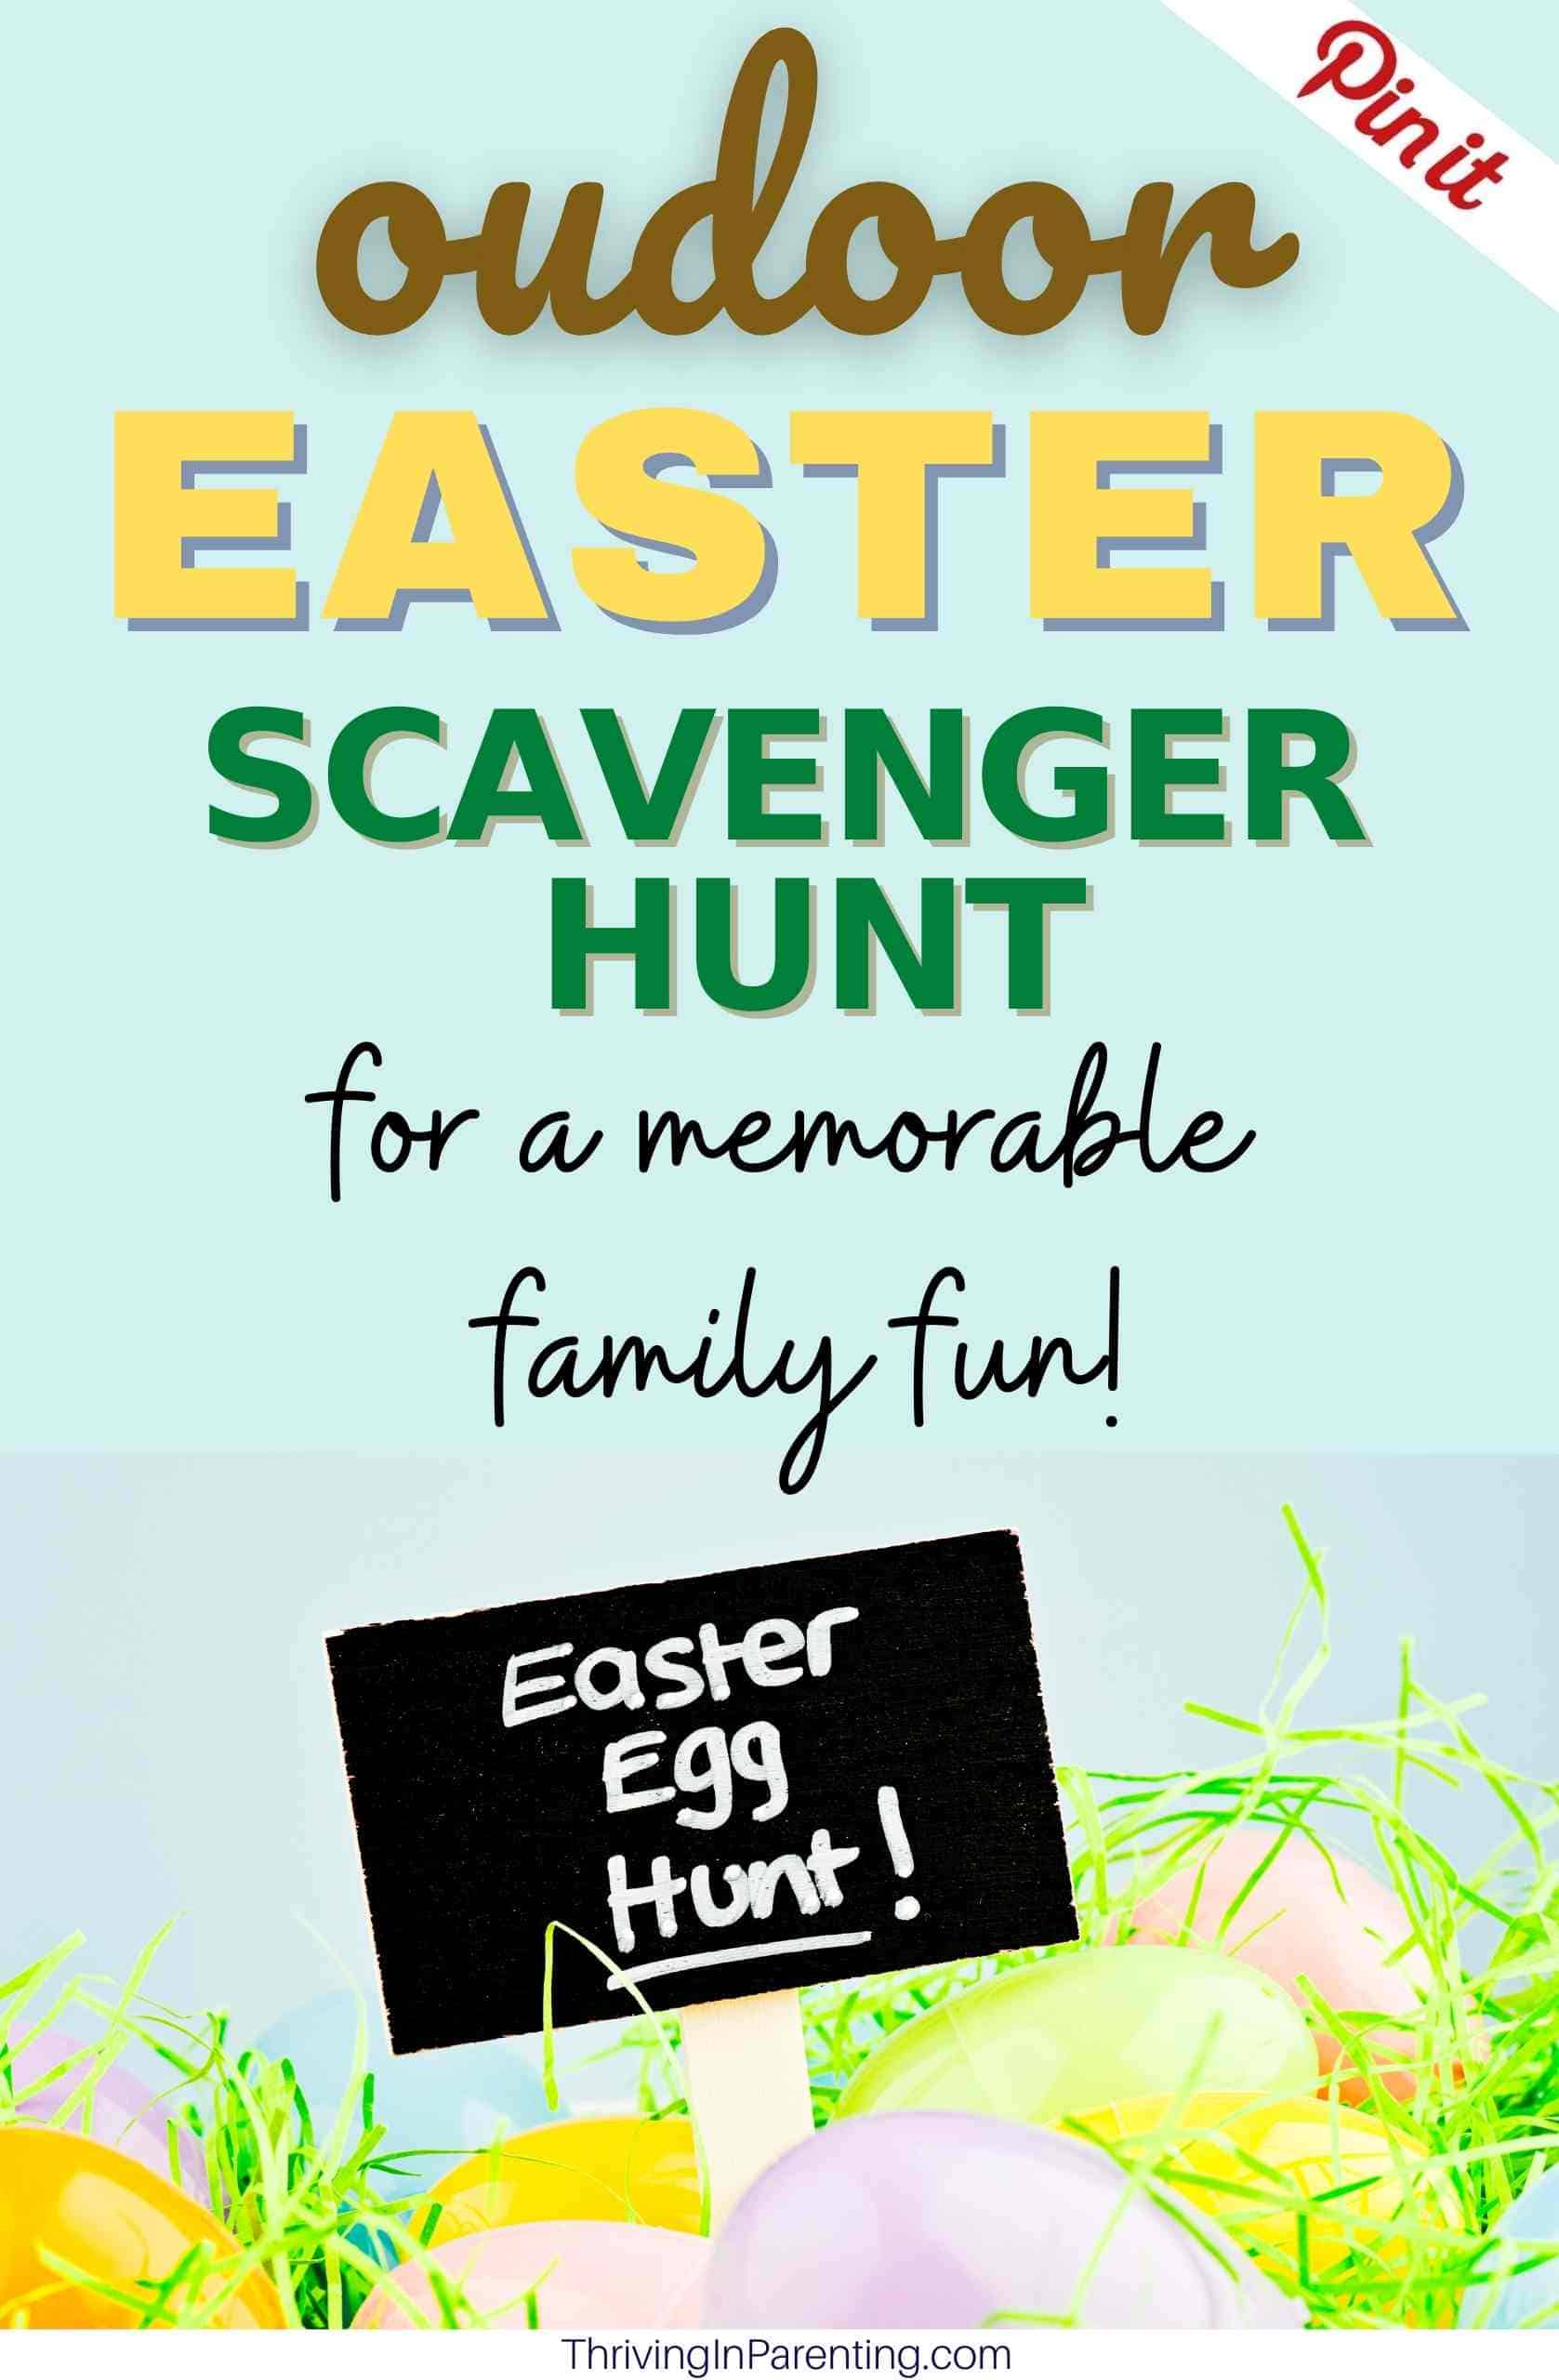 Super Fun Outdoor Easter Scavenger Hunt [With Printable Clues]